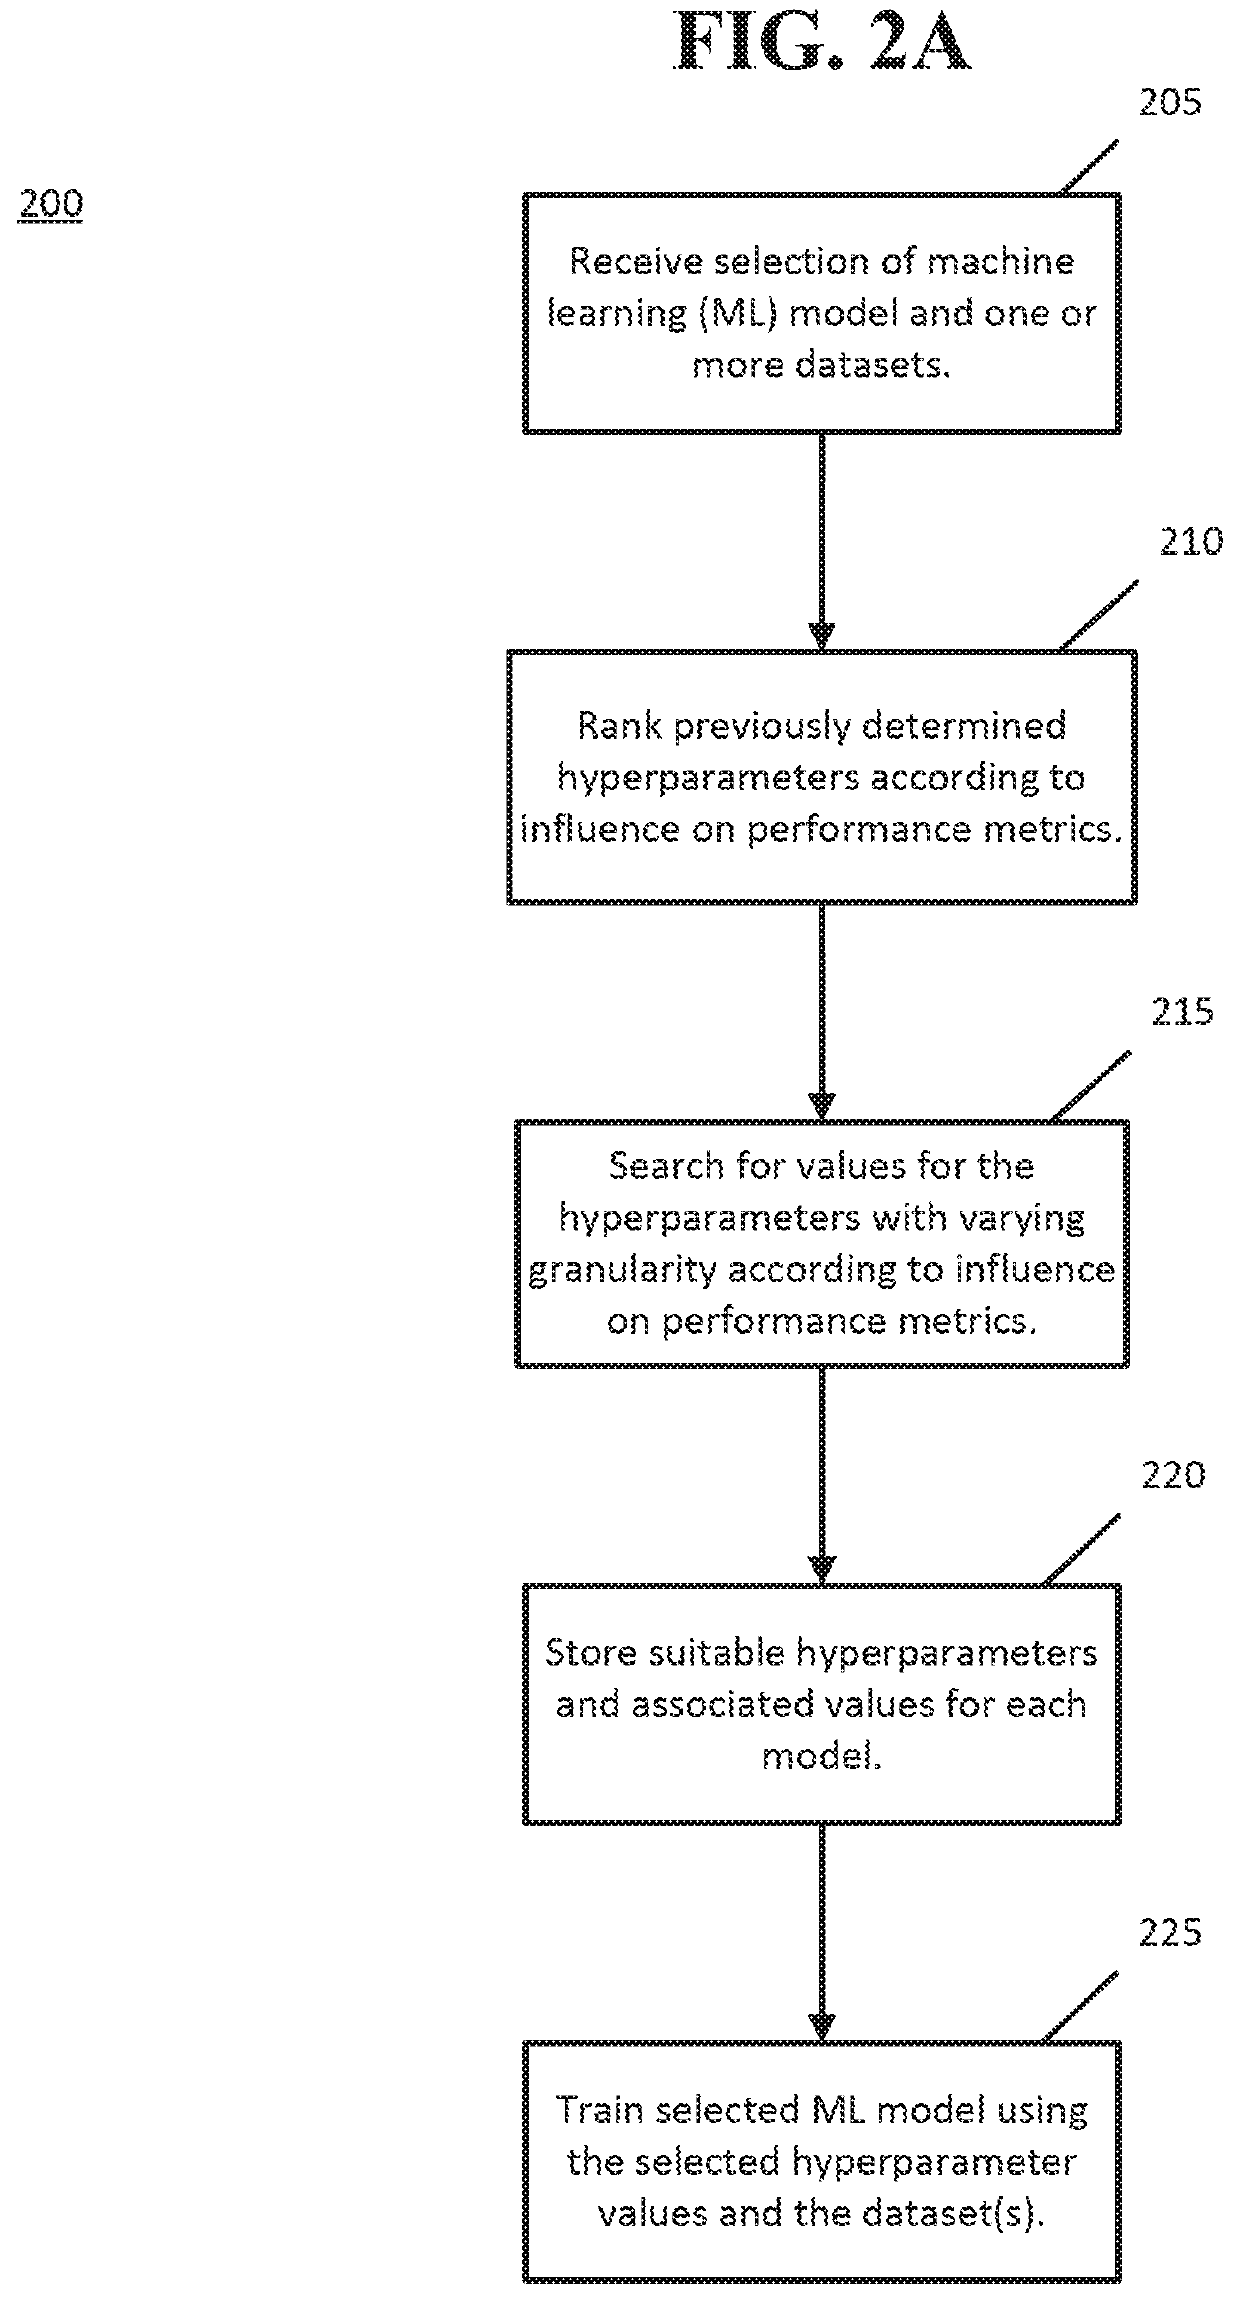 Identification and application of hyperparameters for machine learning